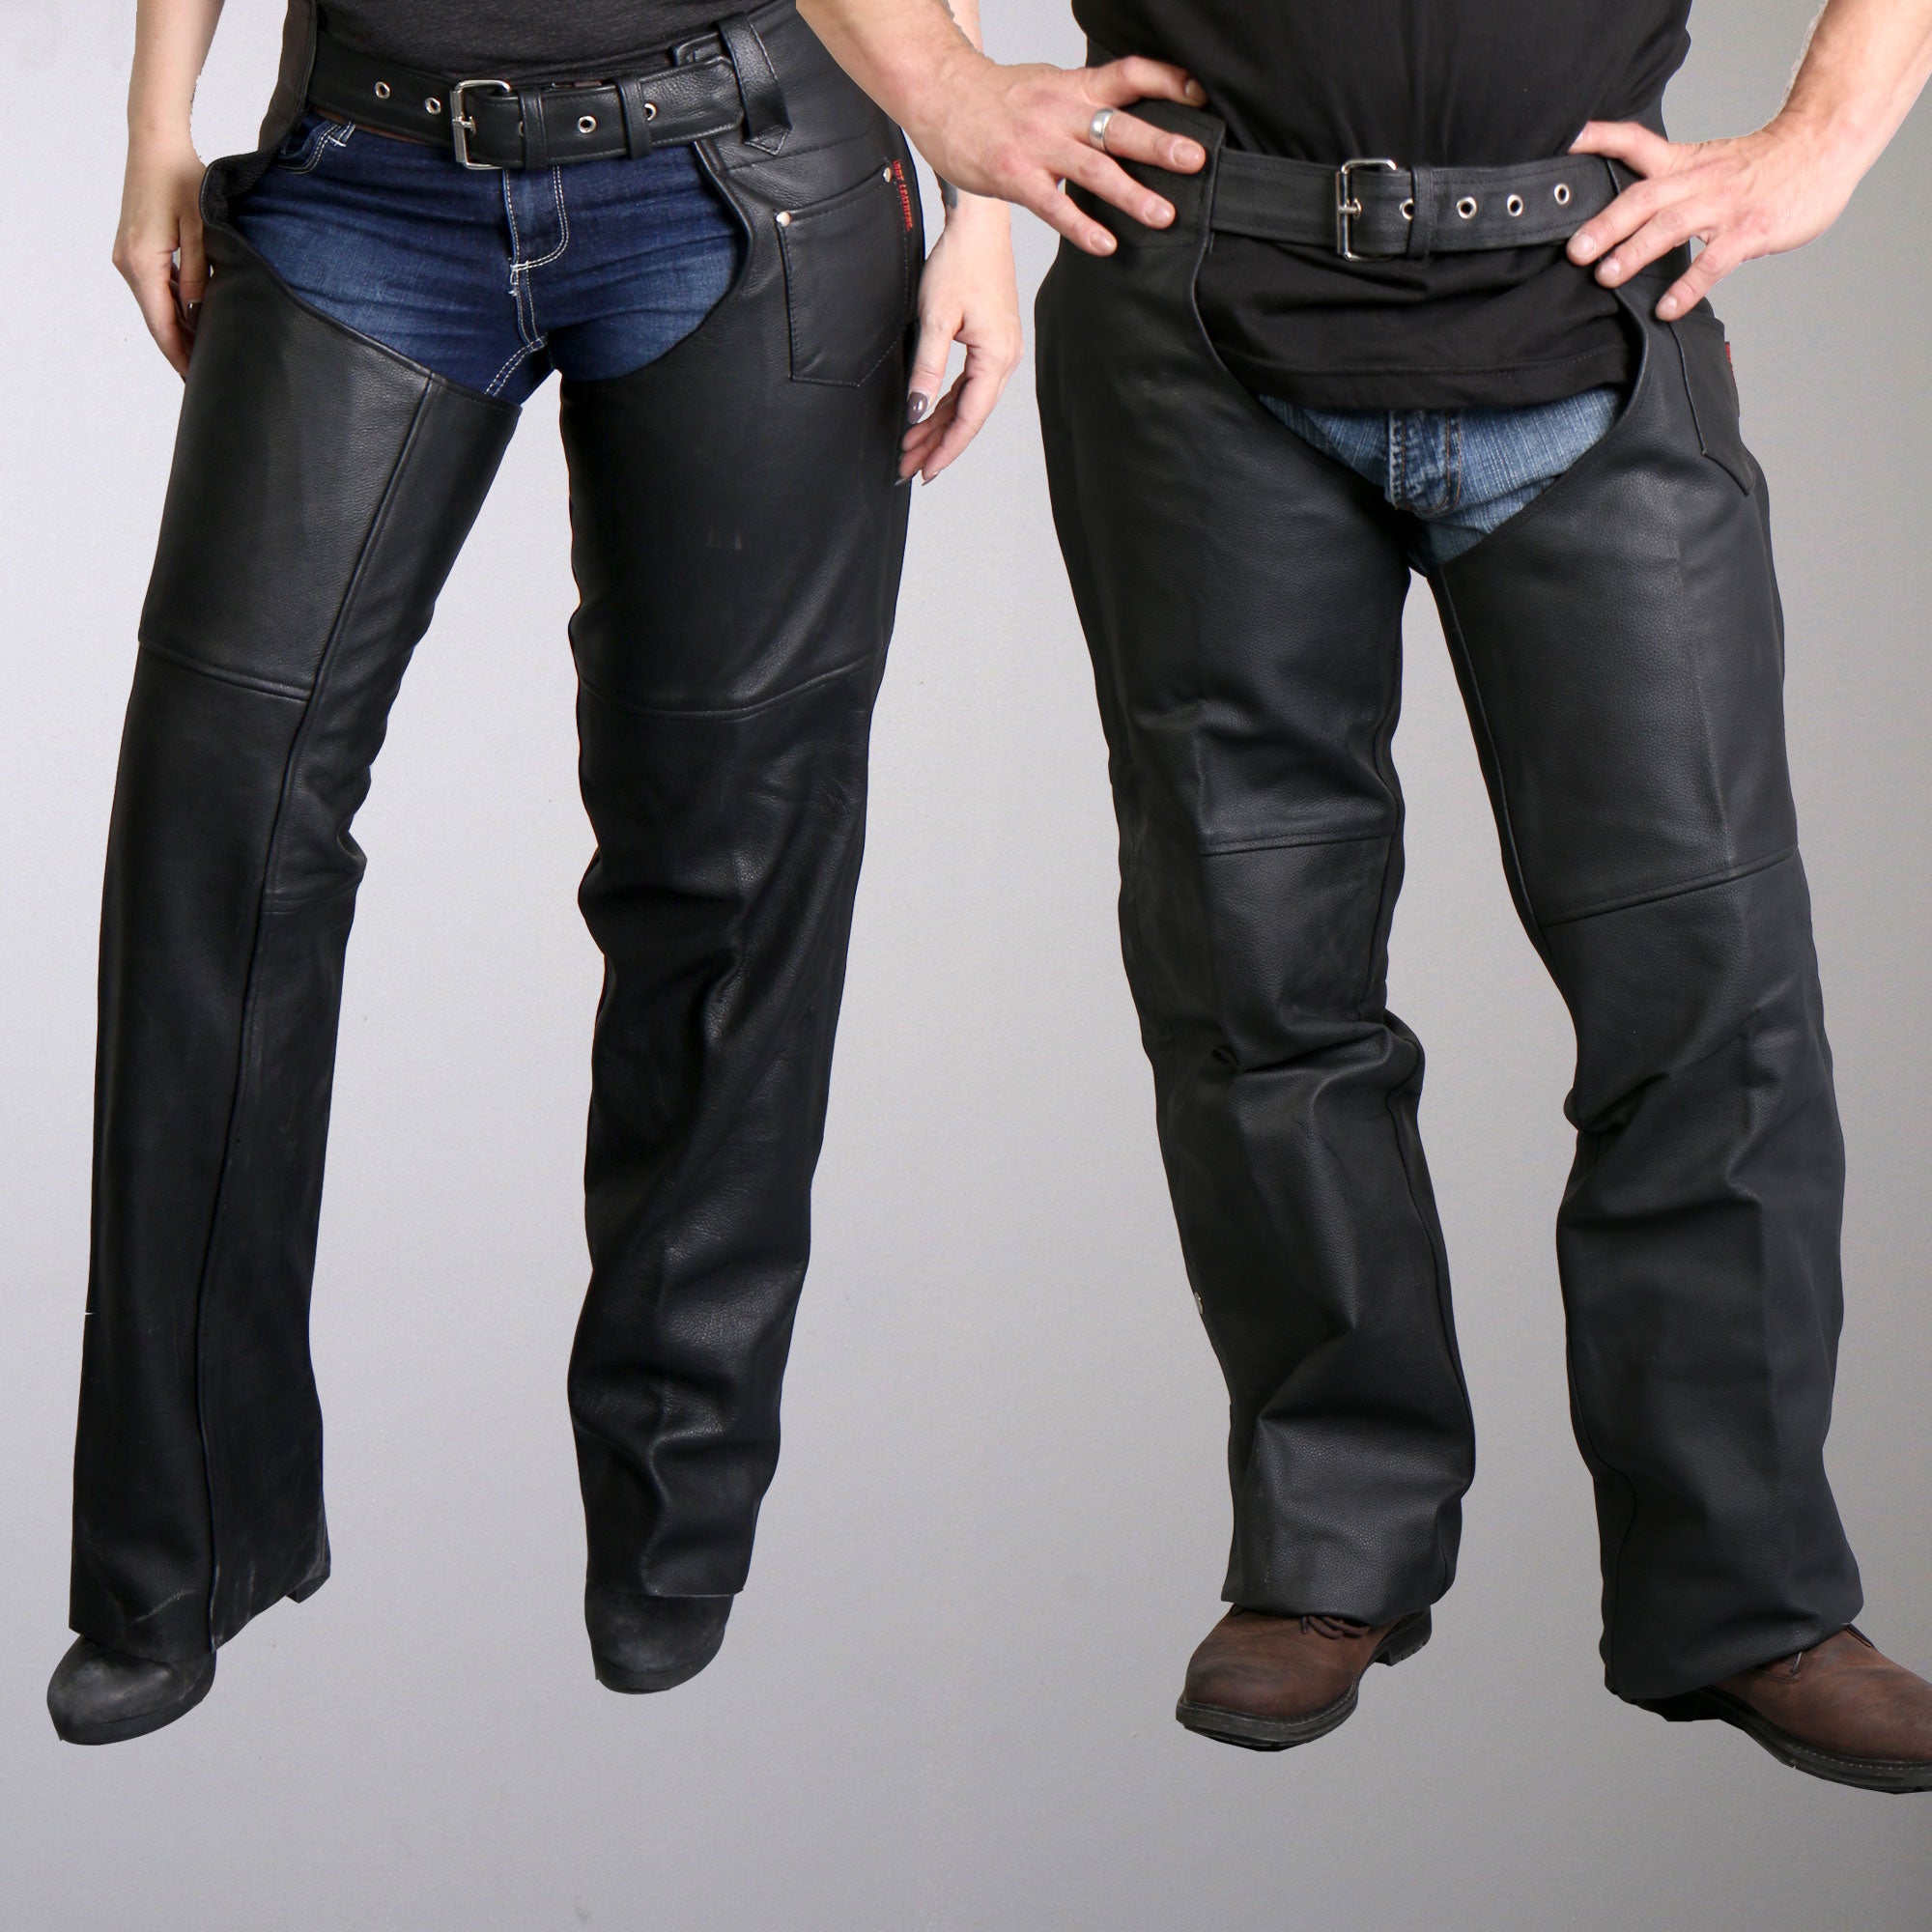 Hot Leathers CHM1001 Best Selling Black Fully Lined Unisex motorcycle Leather Biker Chaps